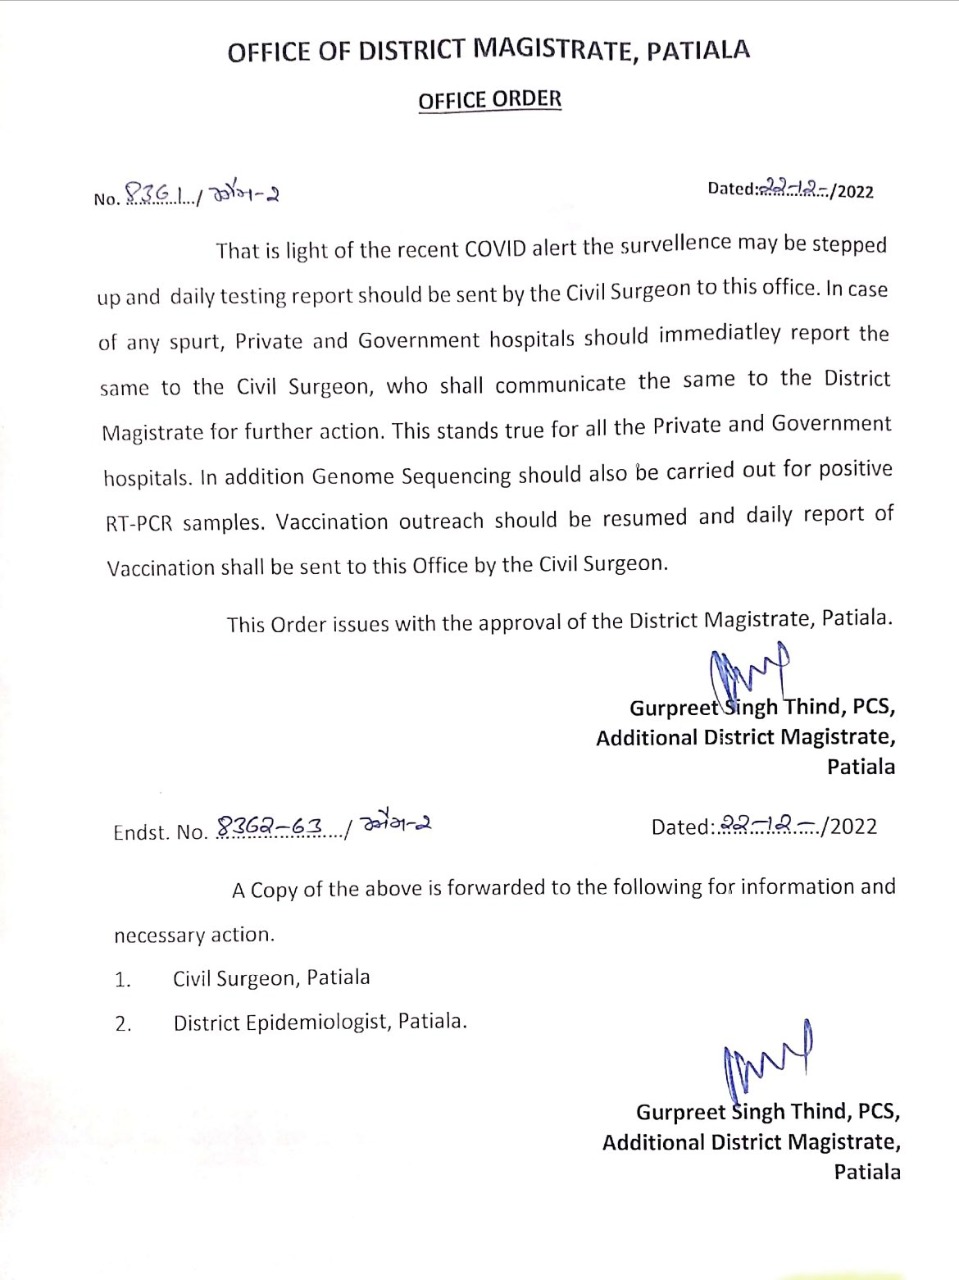 Covid is back:Major decision taken by Patiala Administration 22 December 2022